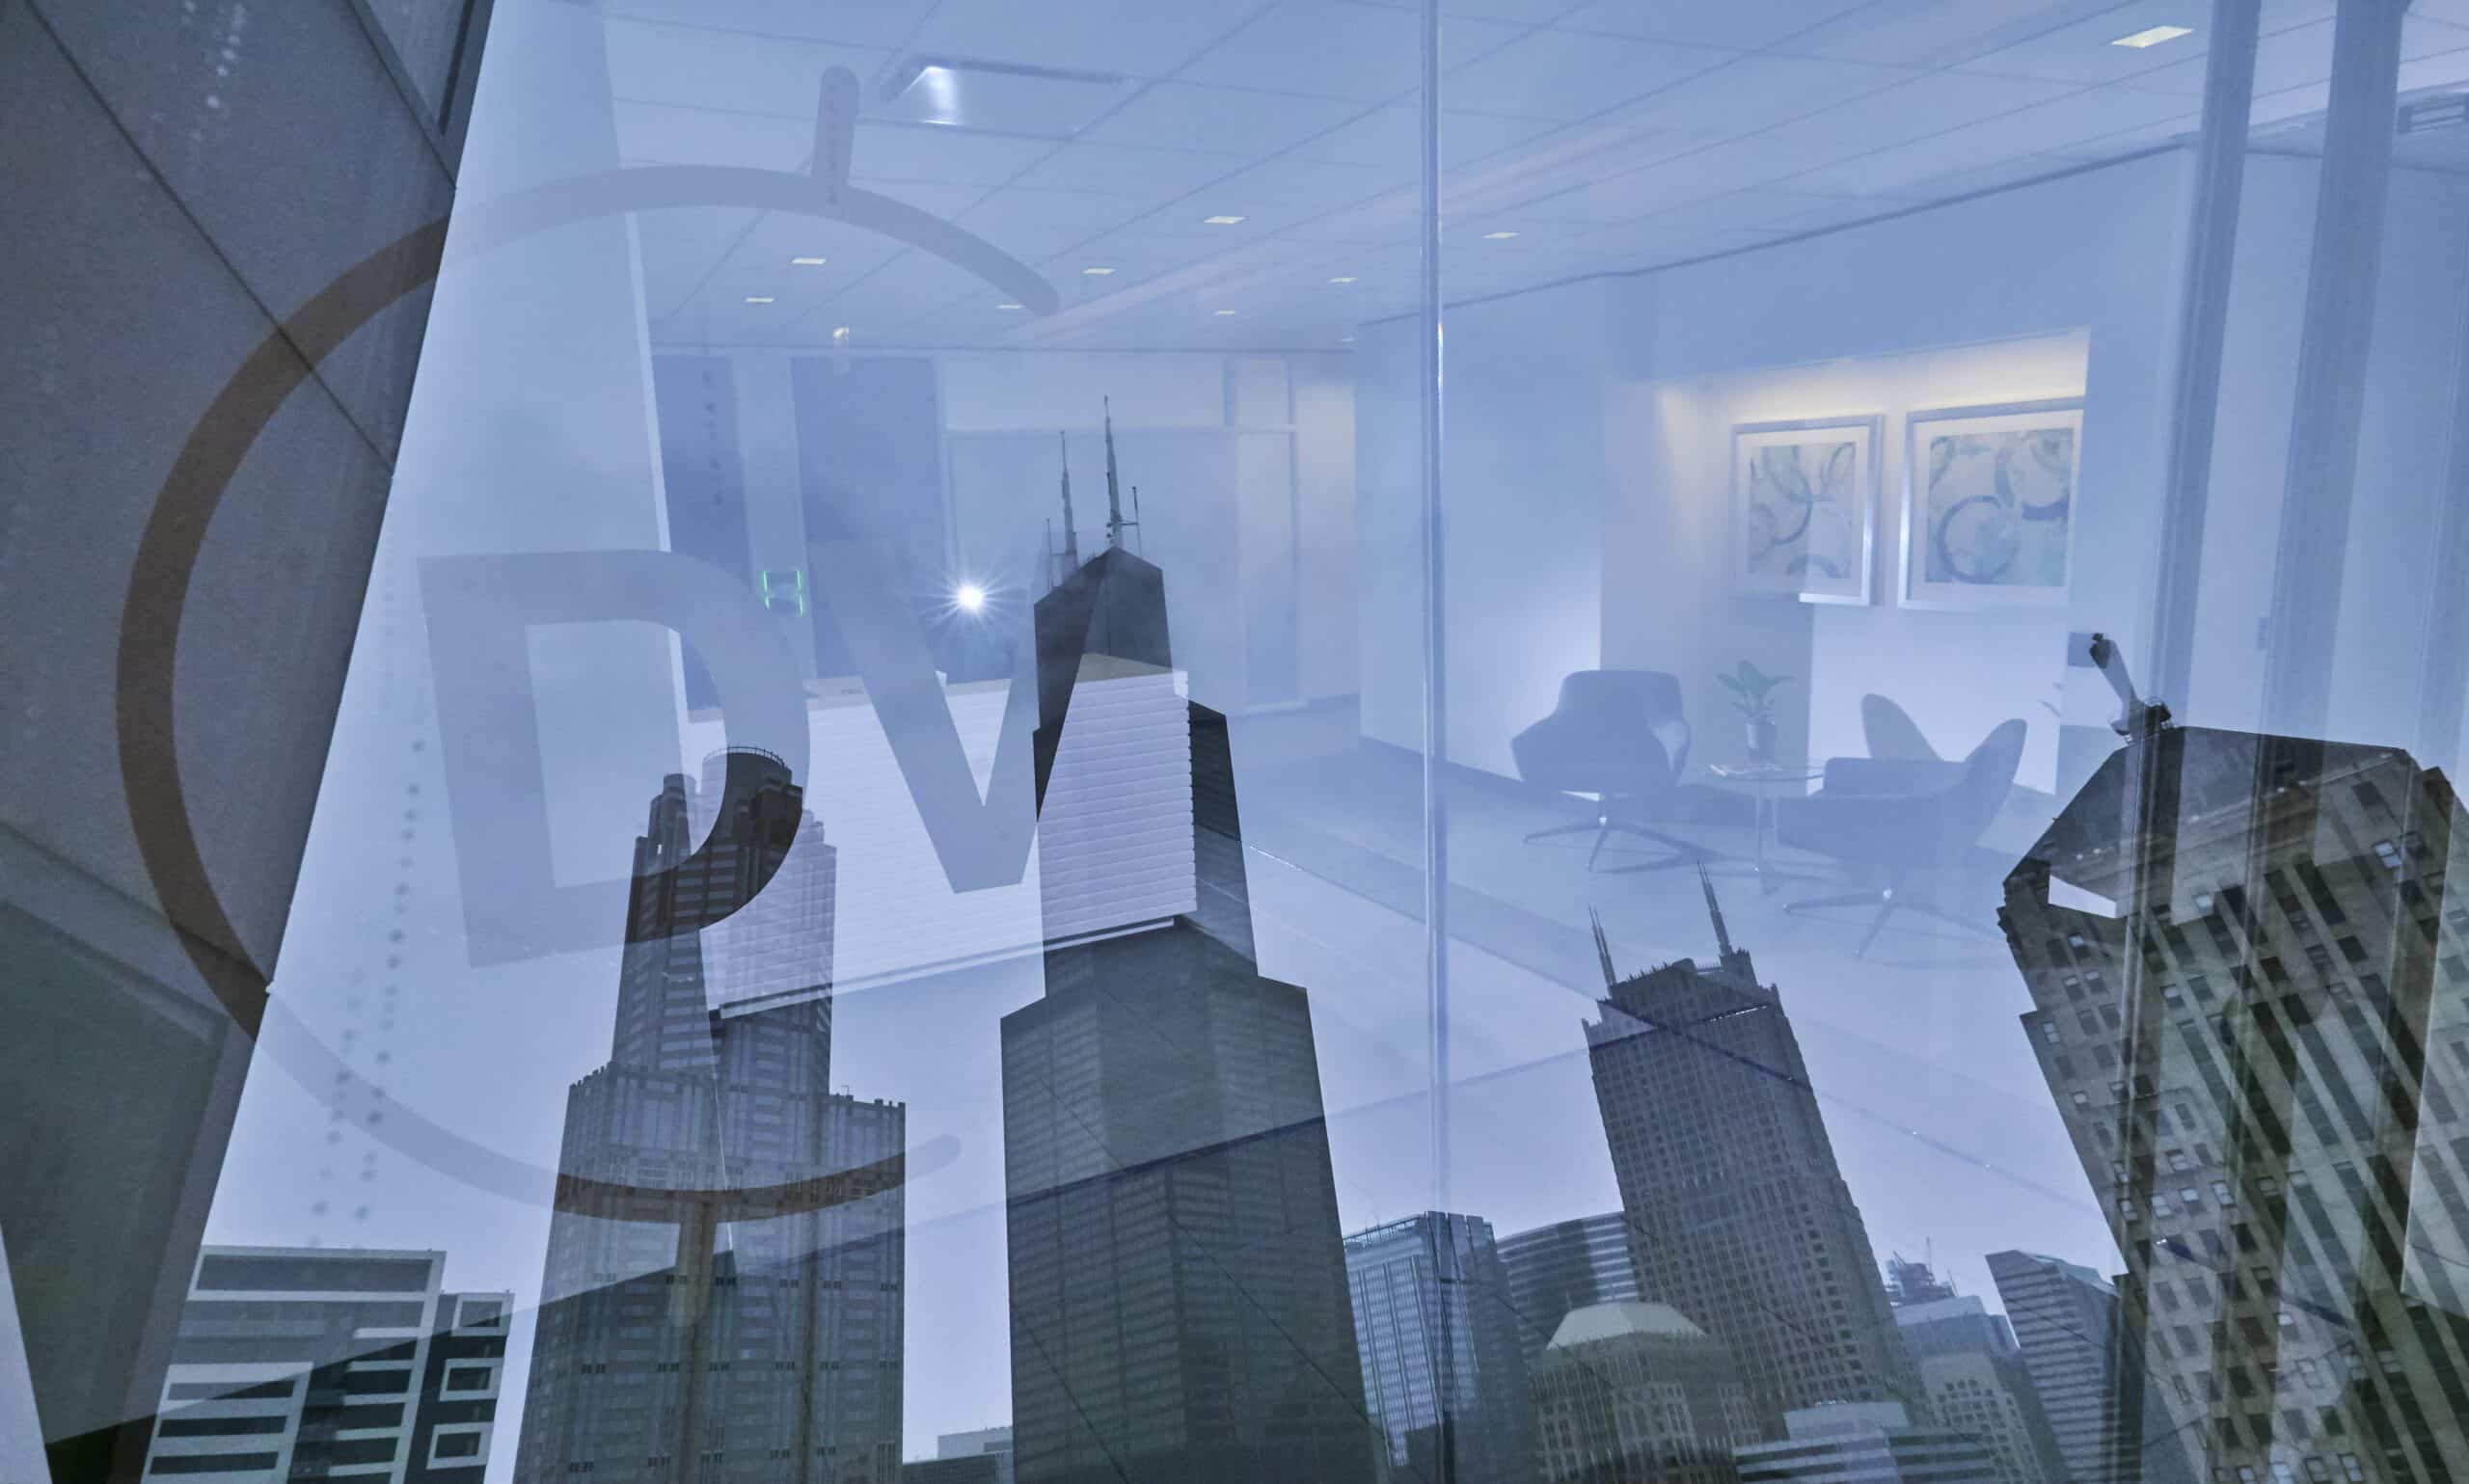 chicago skyline and dv trading office images overlapping